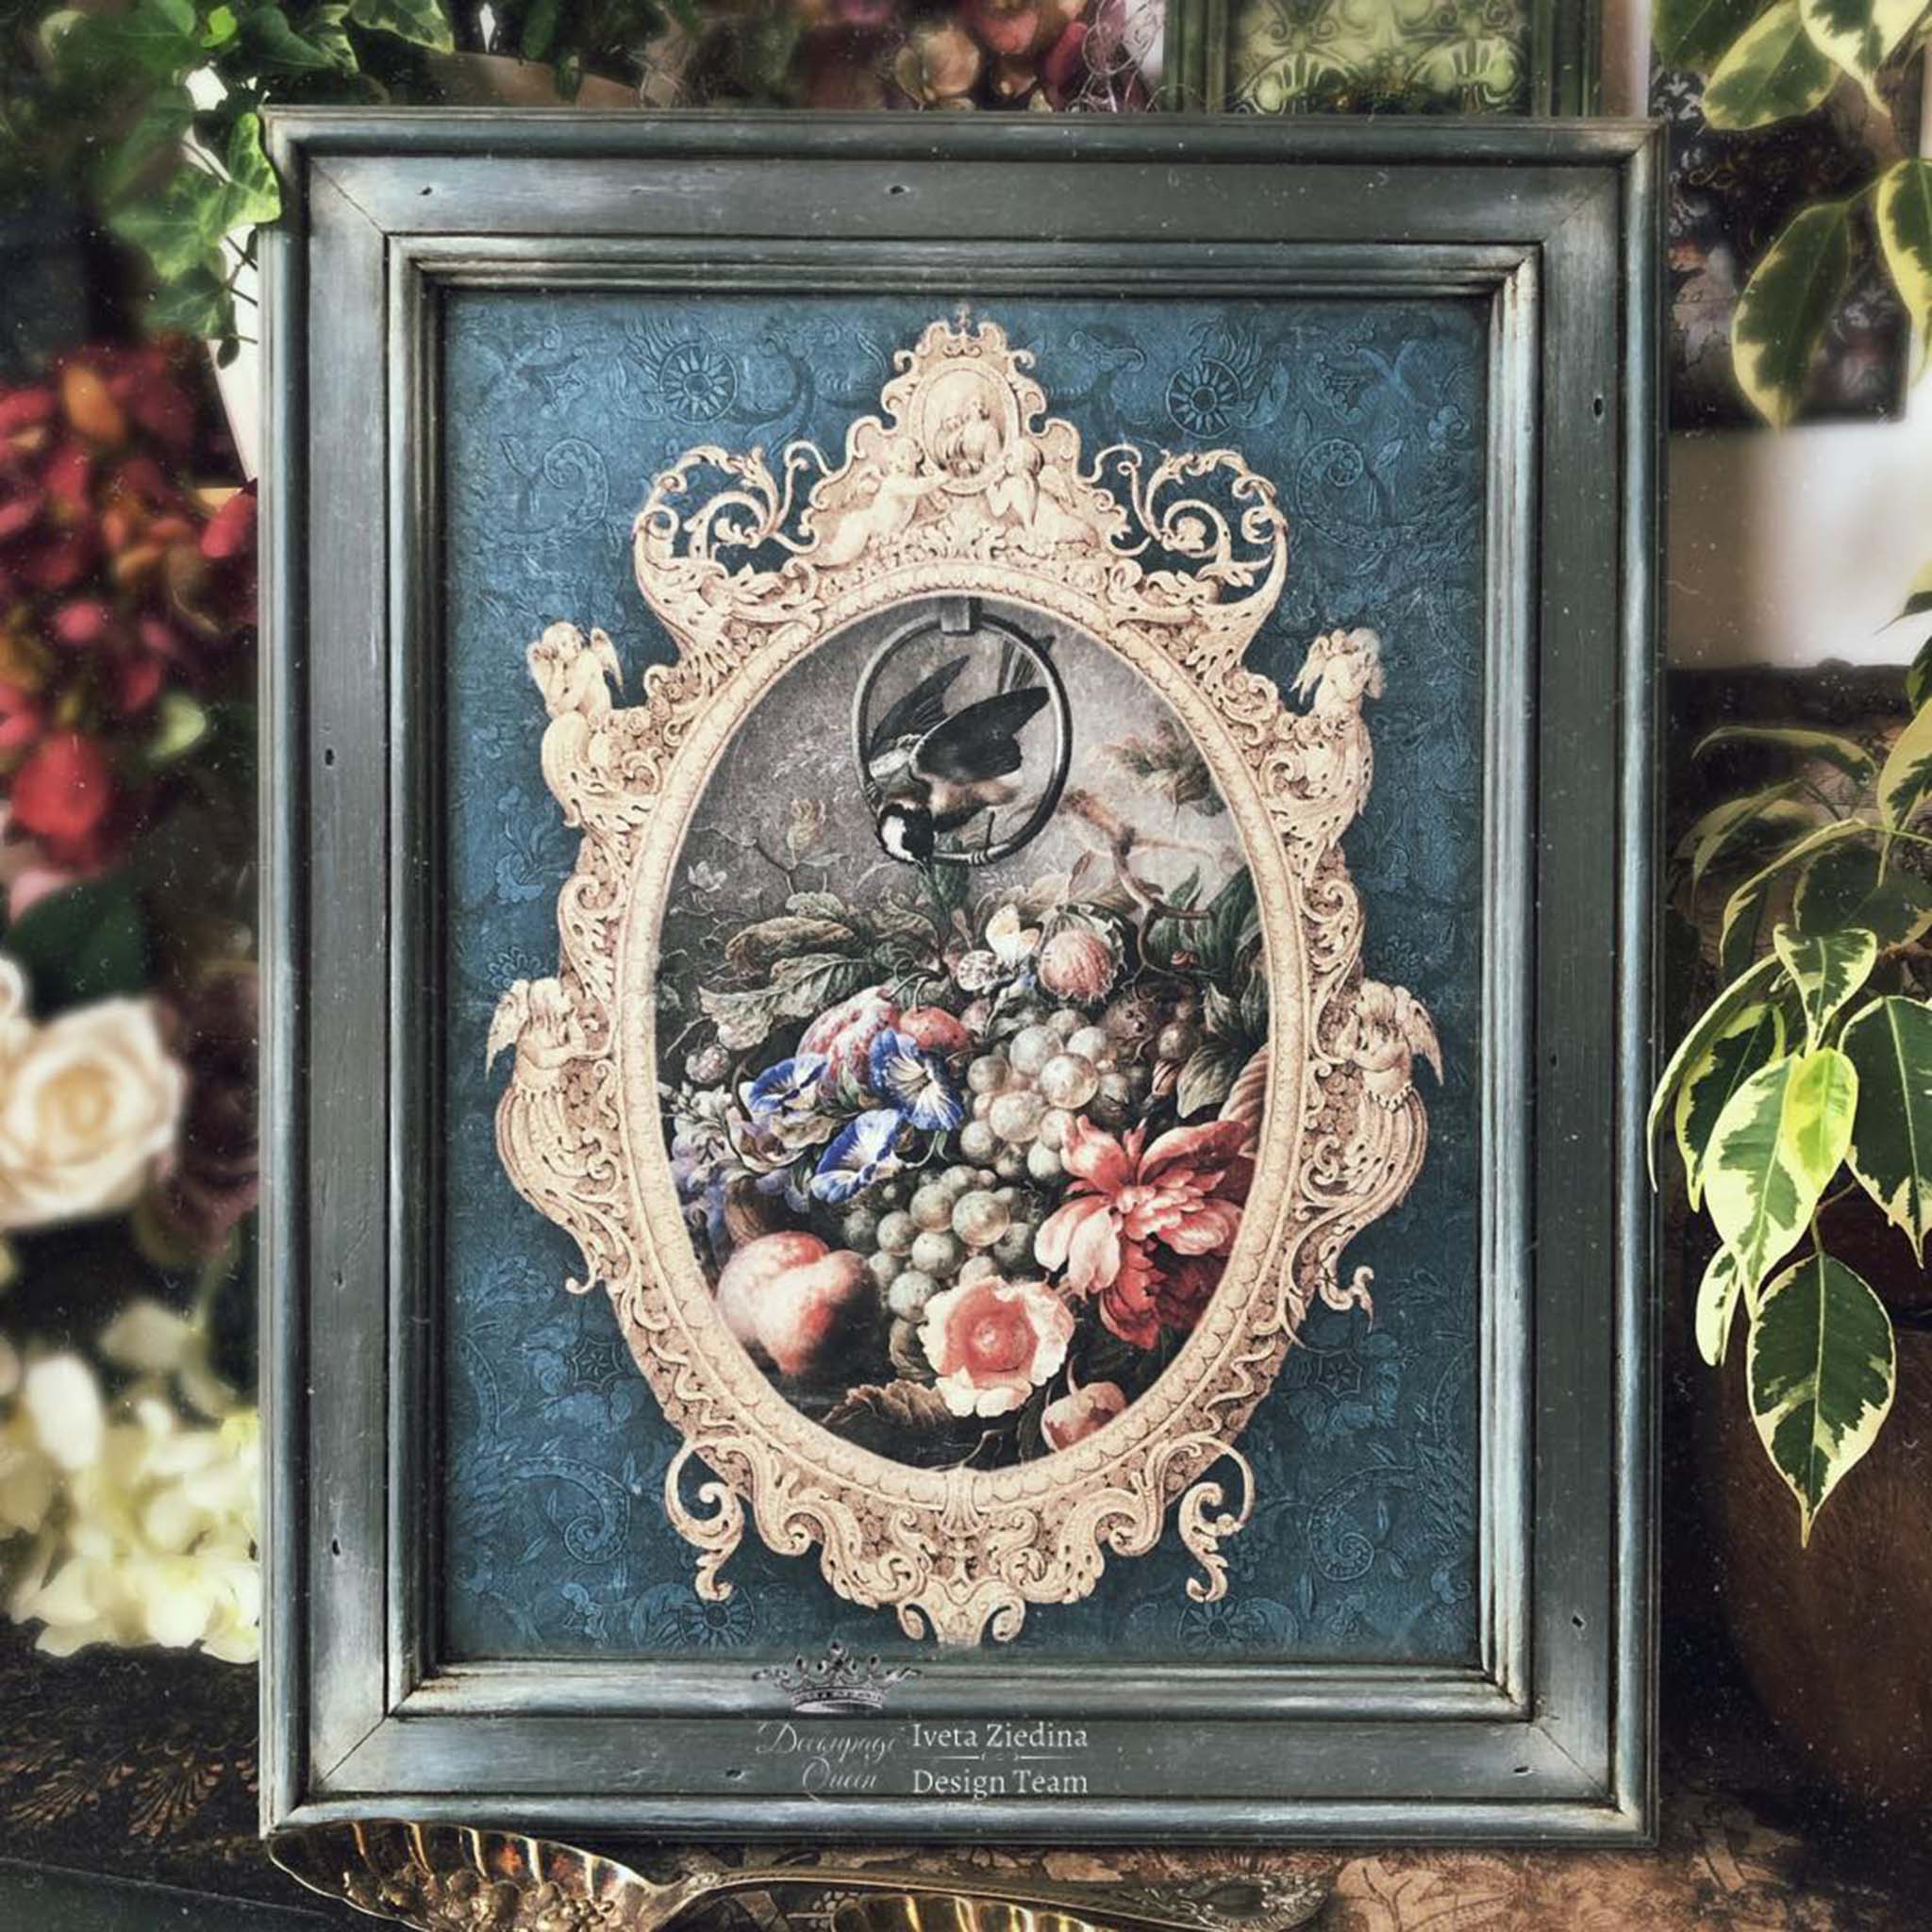 A2 rice paper design of a photo frame with a picture of an ornate frame with flowers and a bird on a perch.